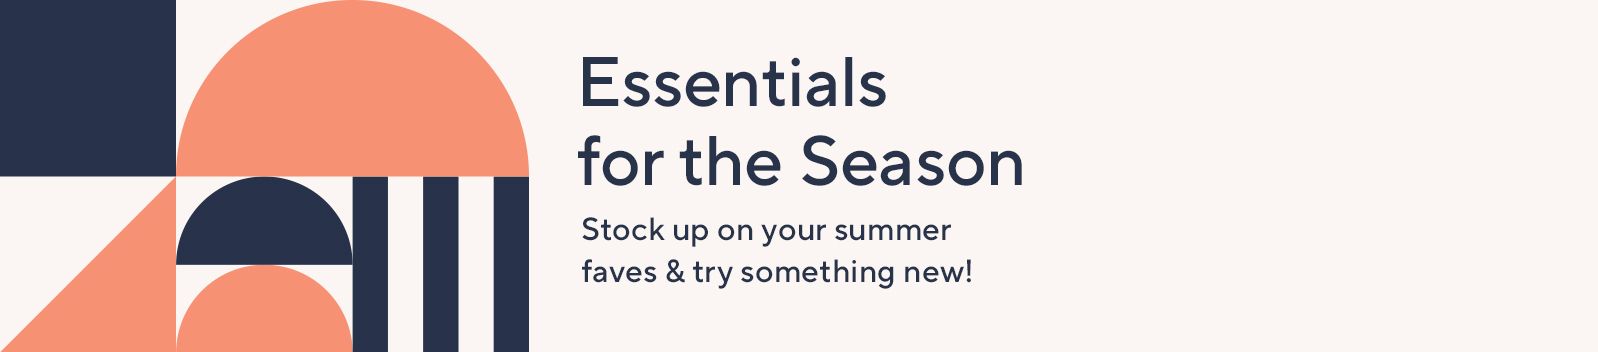 Essentials for the Season. Stock up on your summer faves & try something new!